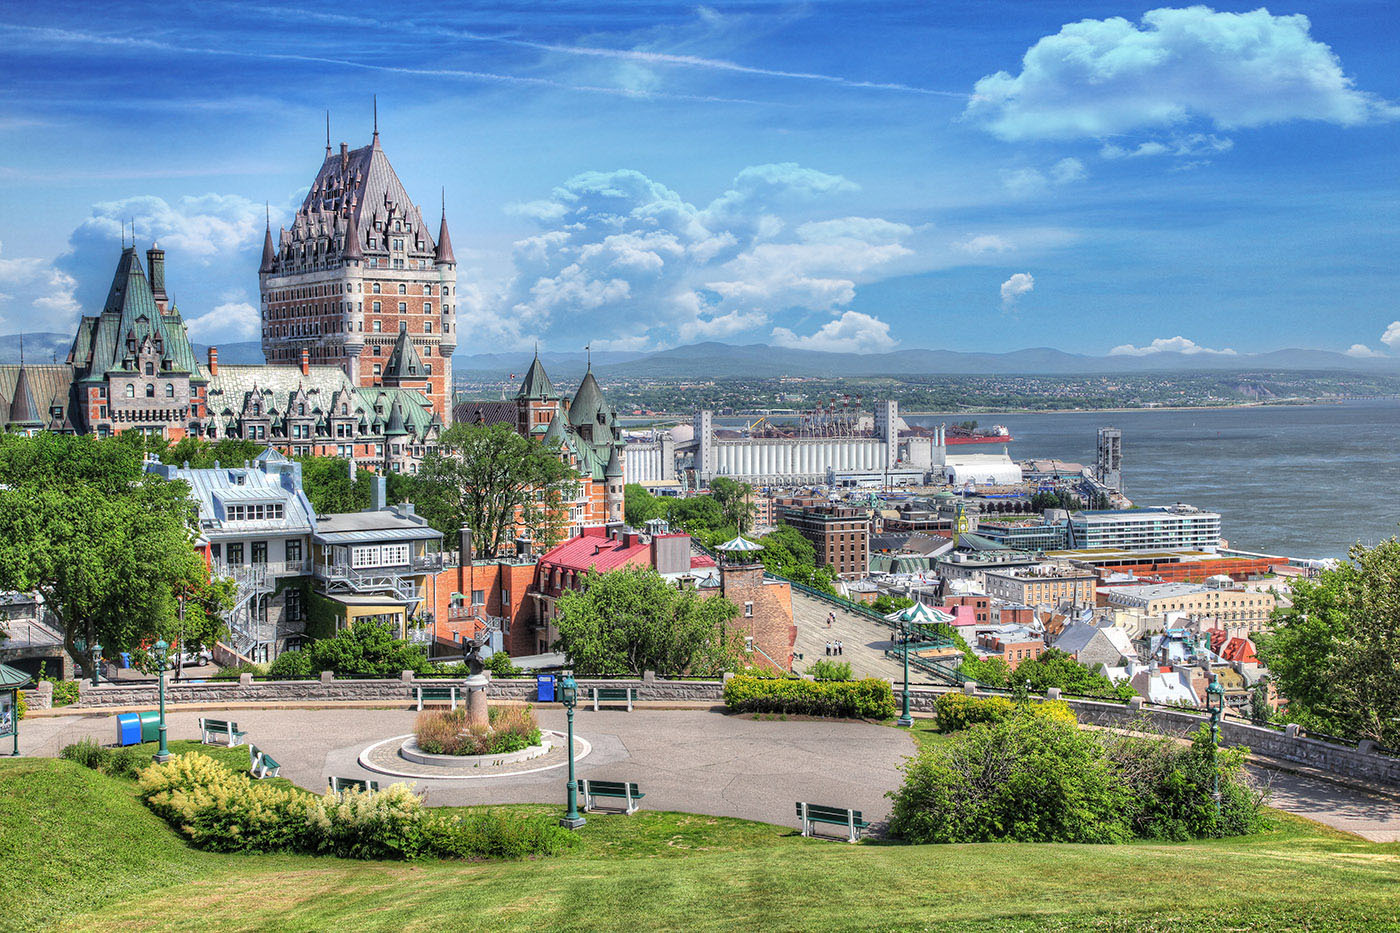 Old Quebec City District in Summer - stock photos and royalty-free images